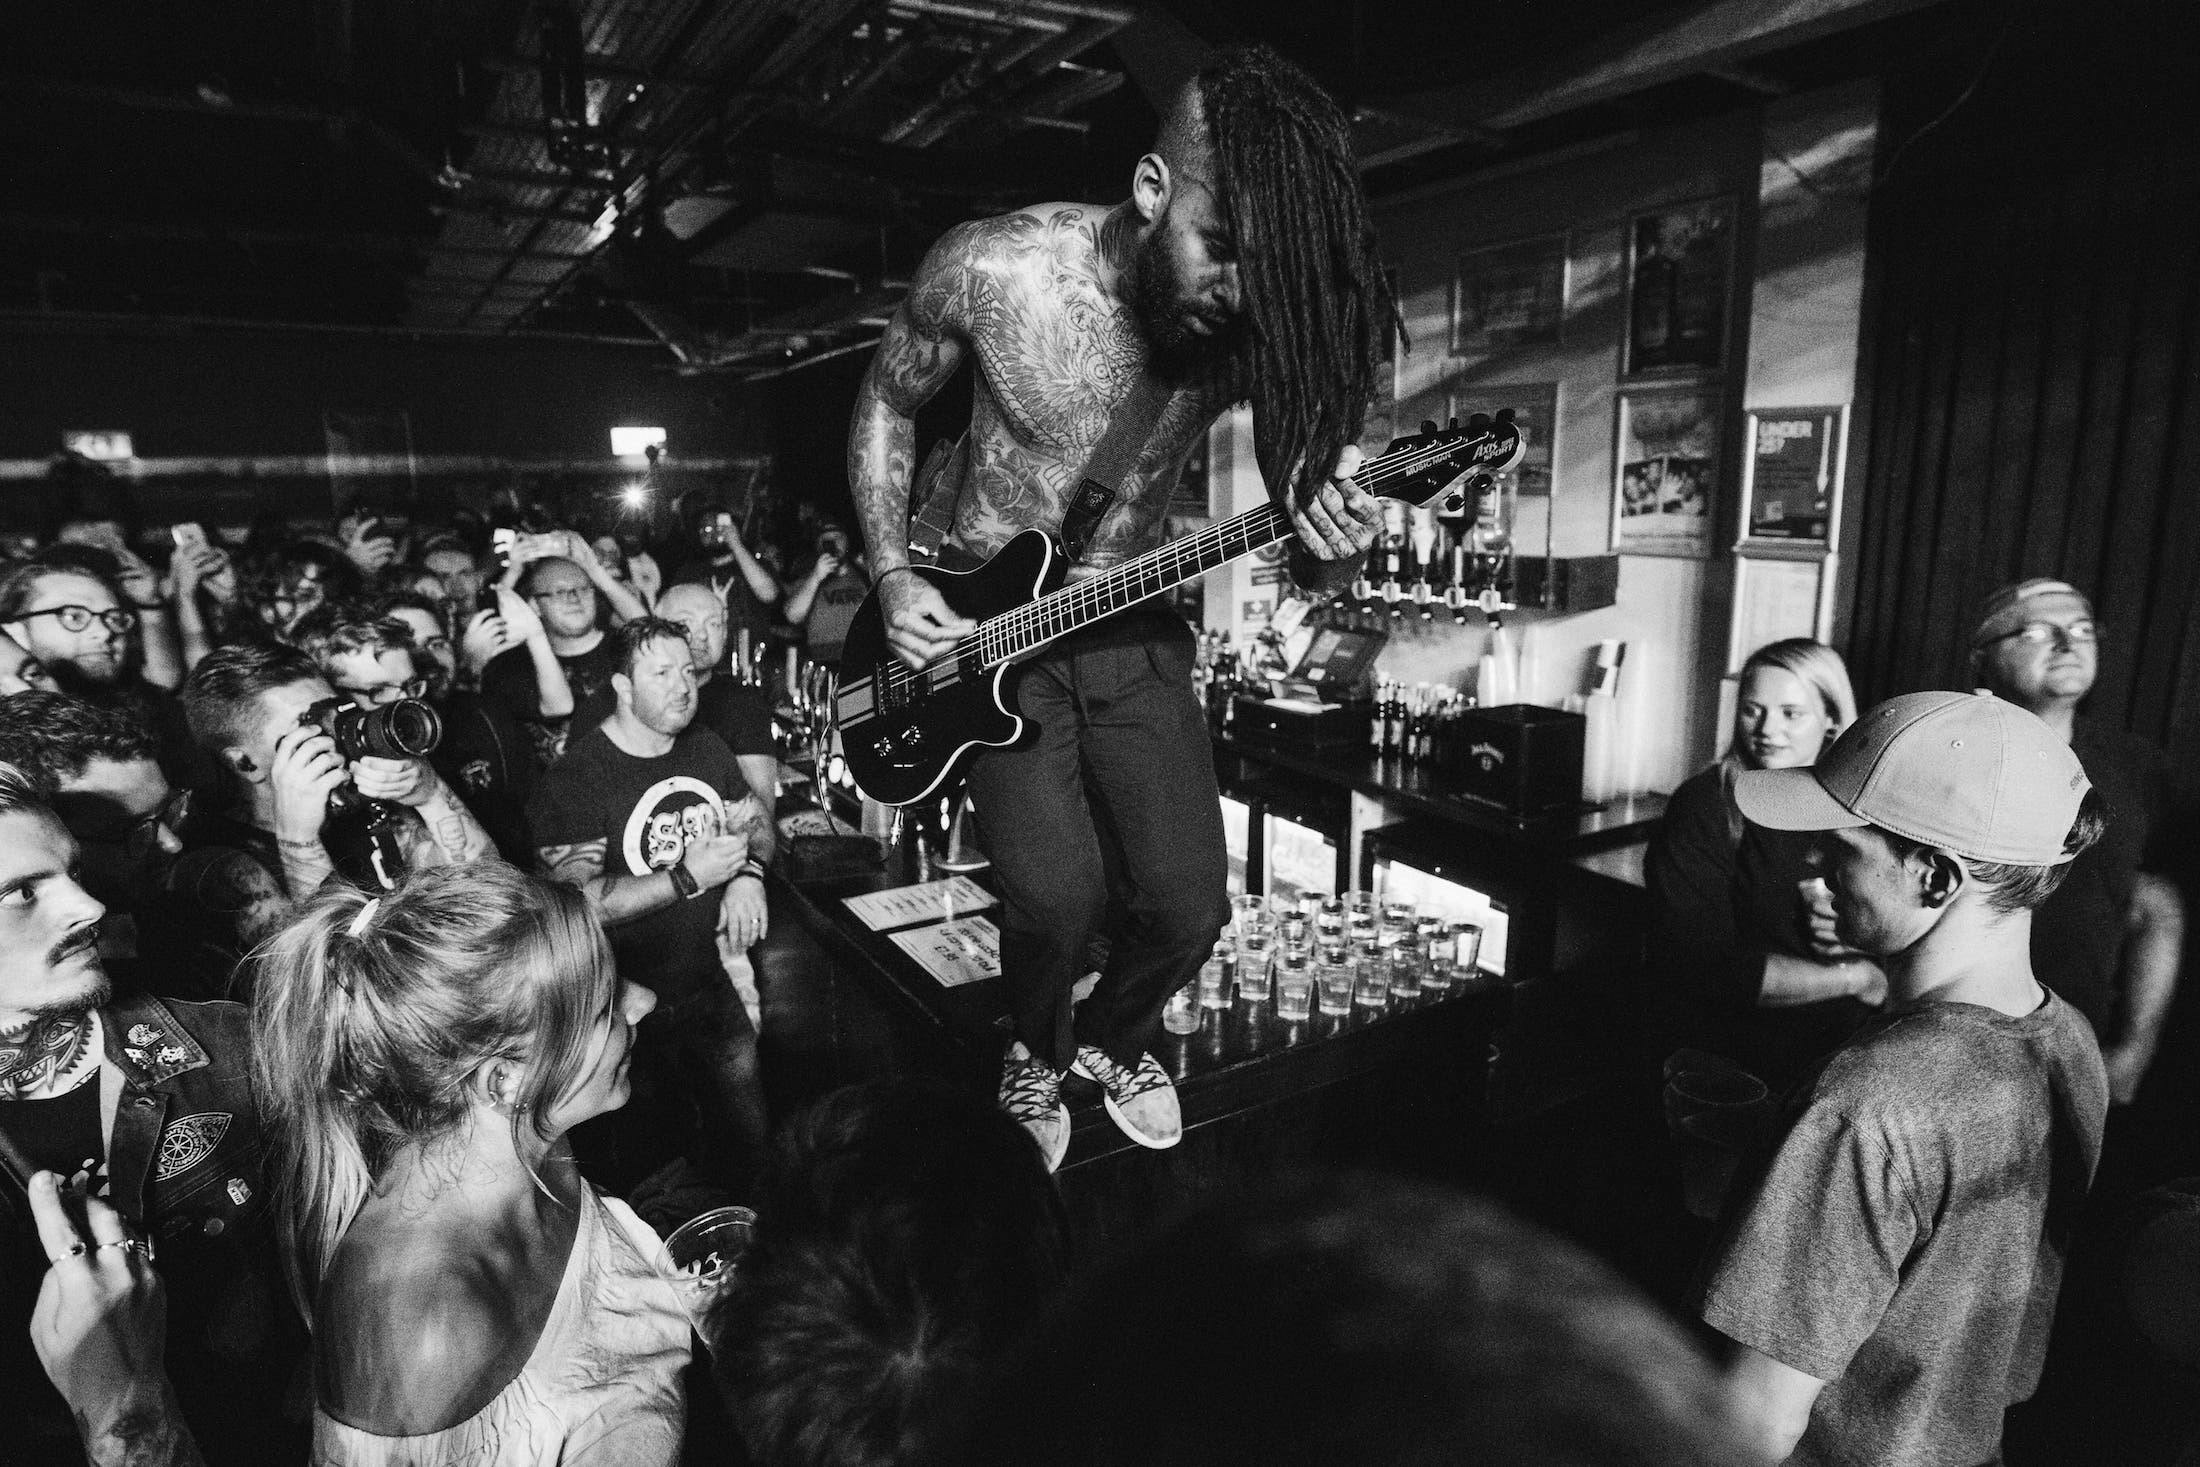 Gallery: THE FEVER 333 Live In London